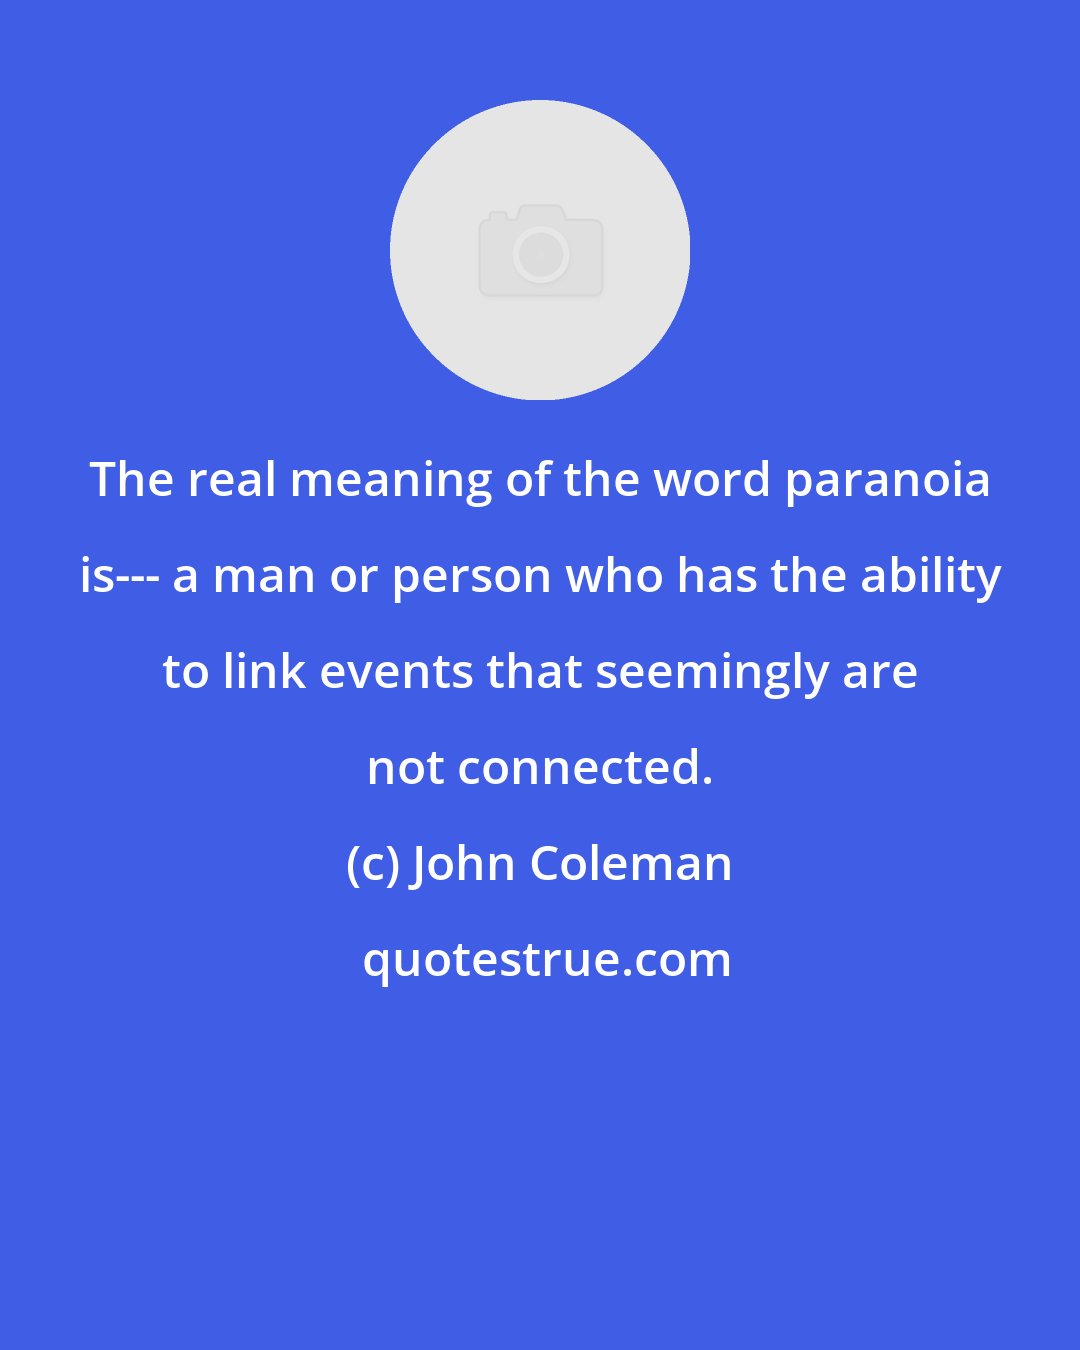 John Coleman: The real meaning of the word paranoia is--- a man or person who has the ability to link events that seemingly are not connected.